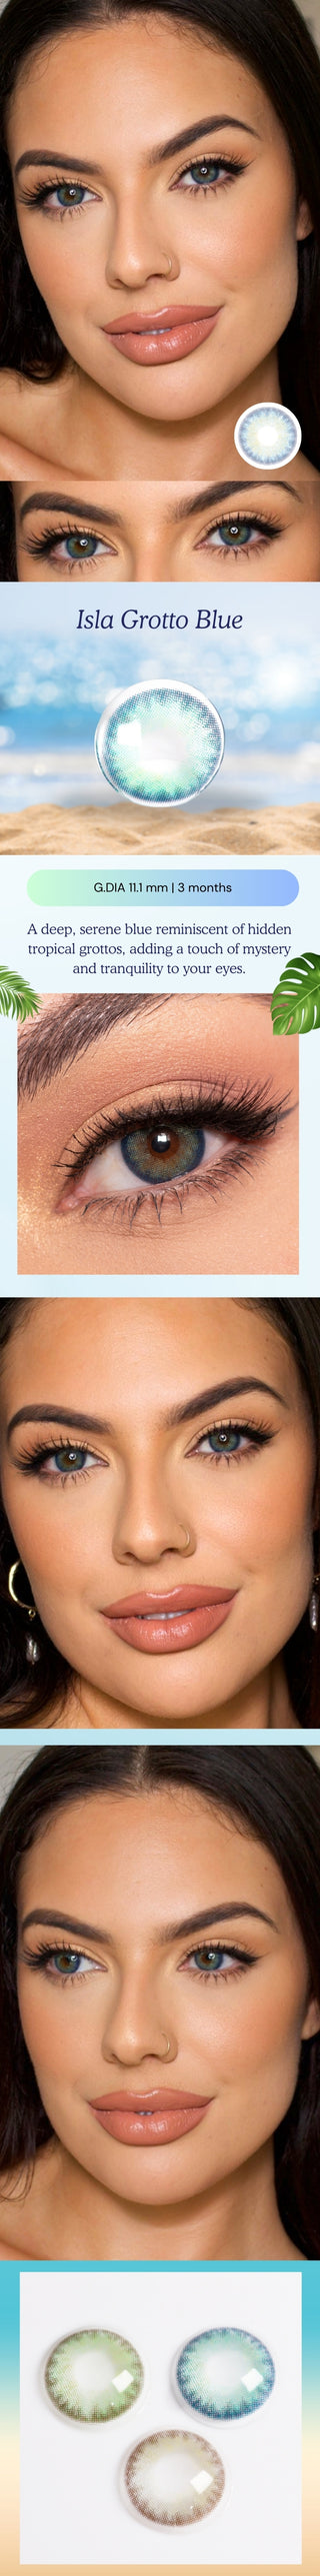 Various angles of a model wearing the Isla Blue Grotto coloured contact lens. A closeup of a model's eyes wearing the green contacts, showing the natural yet noticeable transformation on dark eyes with mascara and neutral eyeshadow.